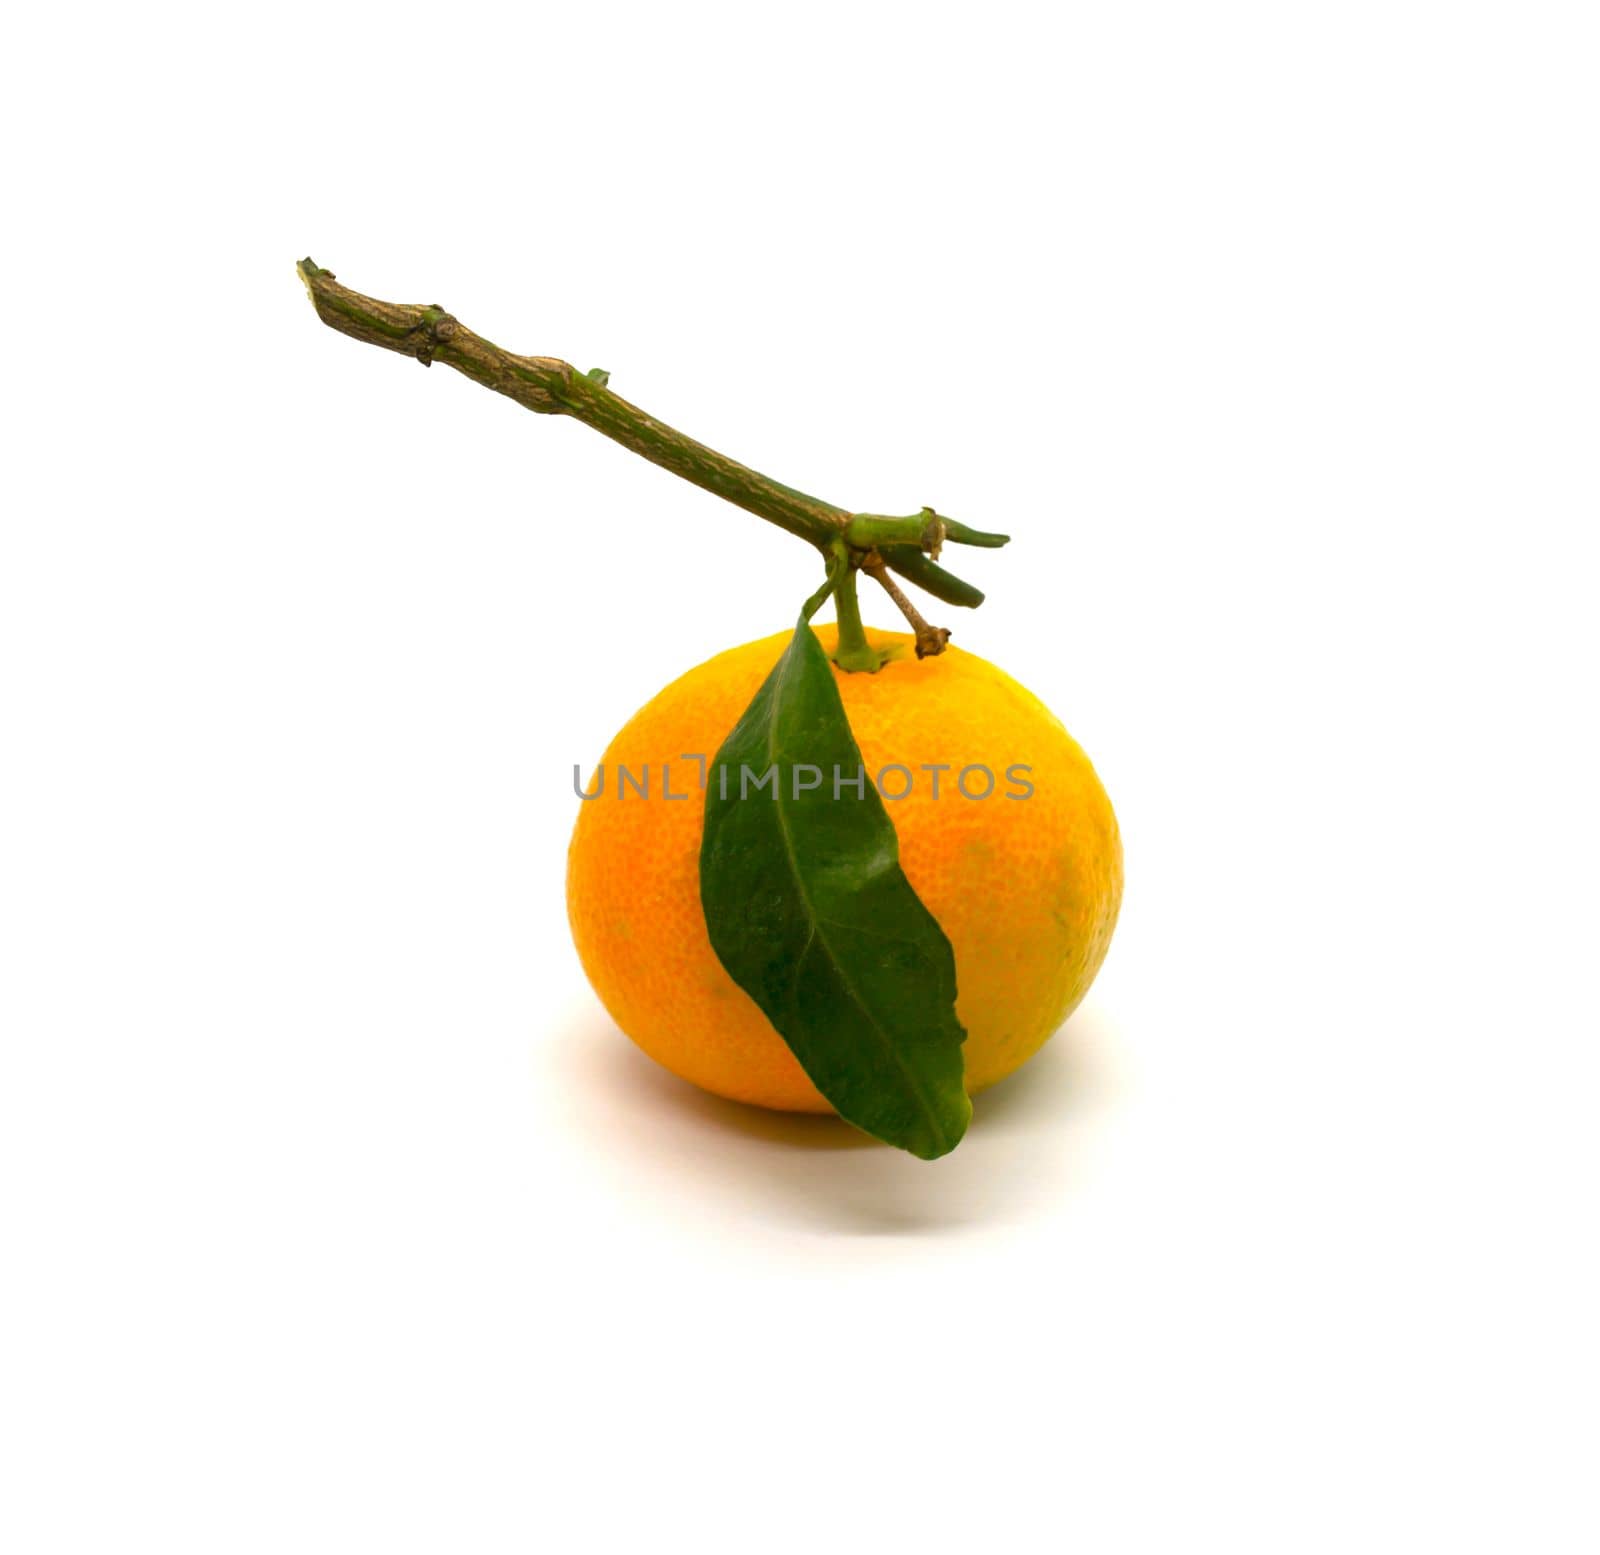 Tangerine with leaves close-up. Tangerine with leaves on a white background.